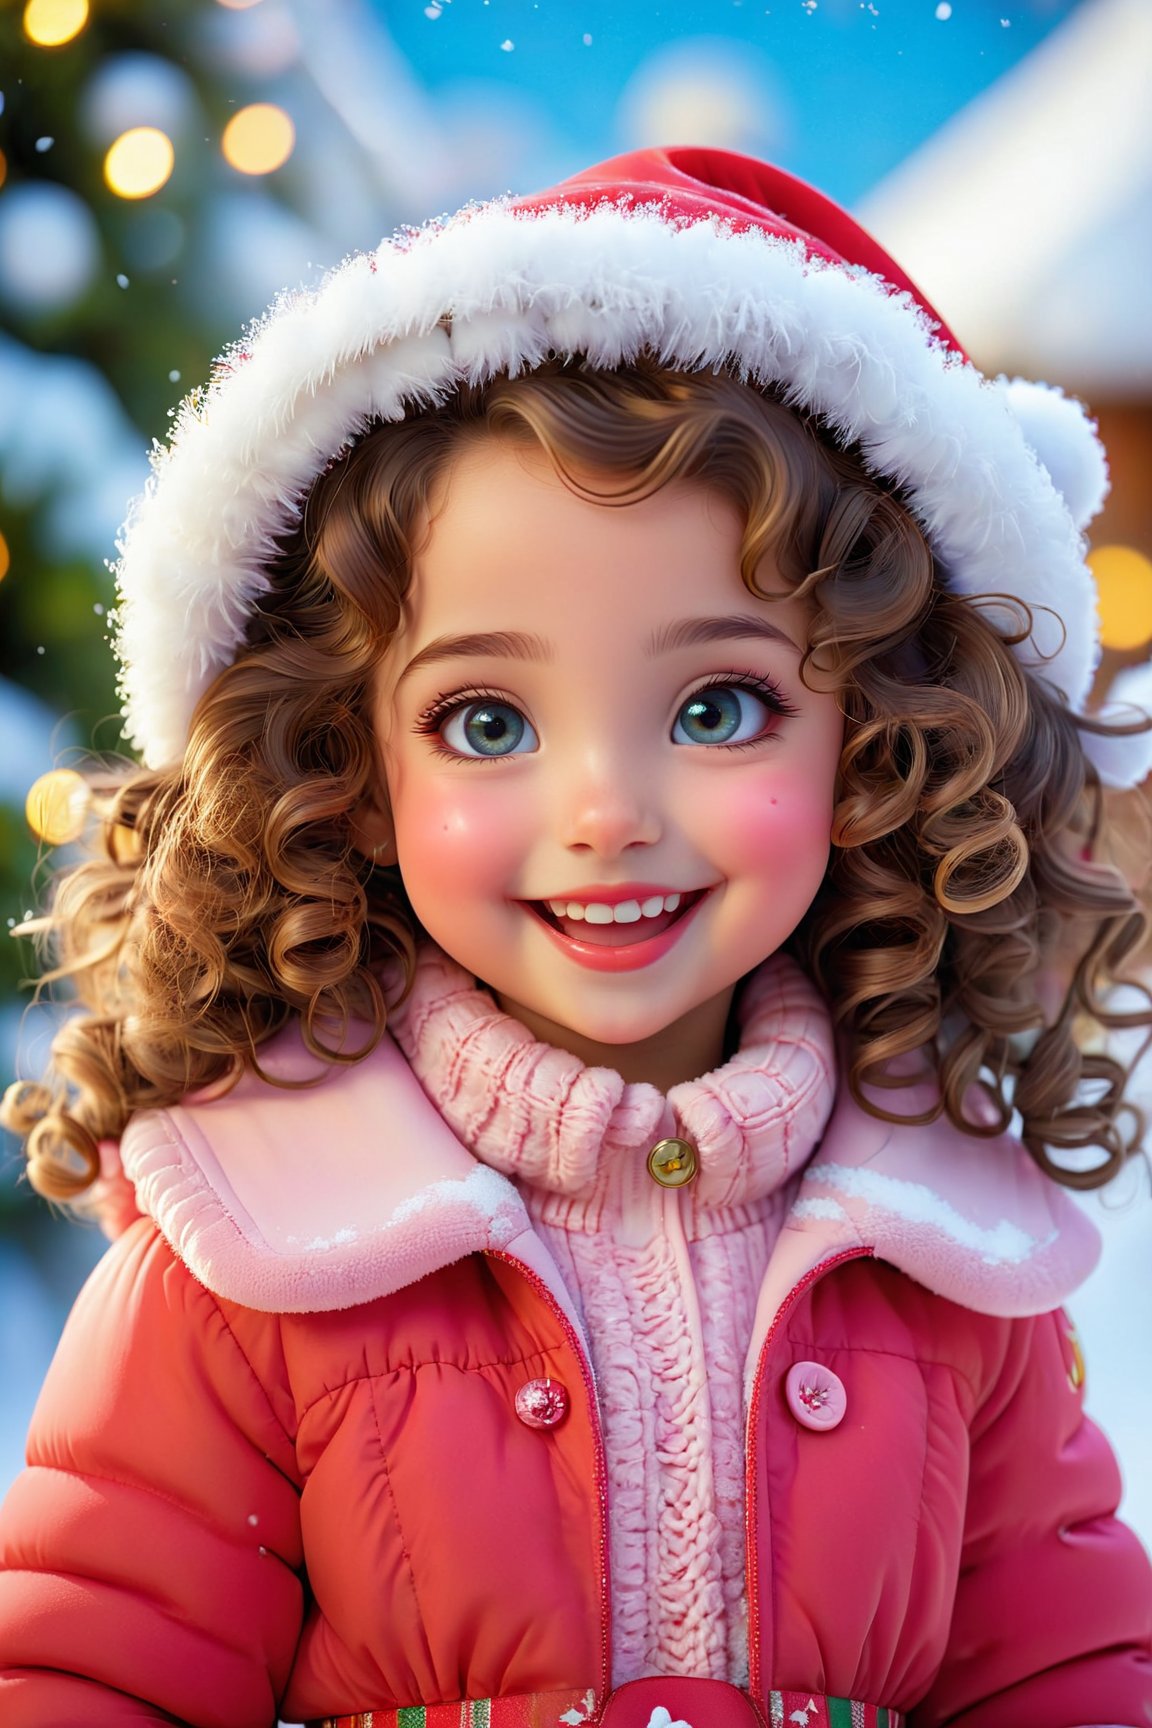 best quality, cute little girl, christmas outfit, cute smiley, blushing face, detailed eyes, detailed lips, curly hair, rosy cheeks, sparkling eyes, joyful expression, snowy background, winter scenery, soft lighting, vibrant colors, festive atmosphere